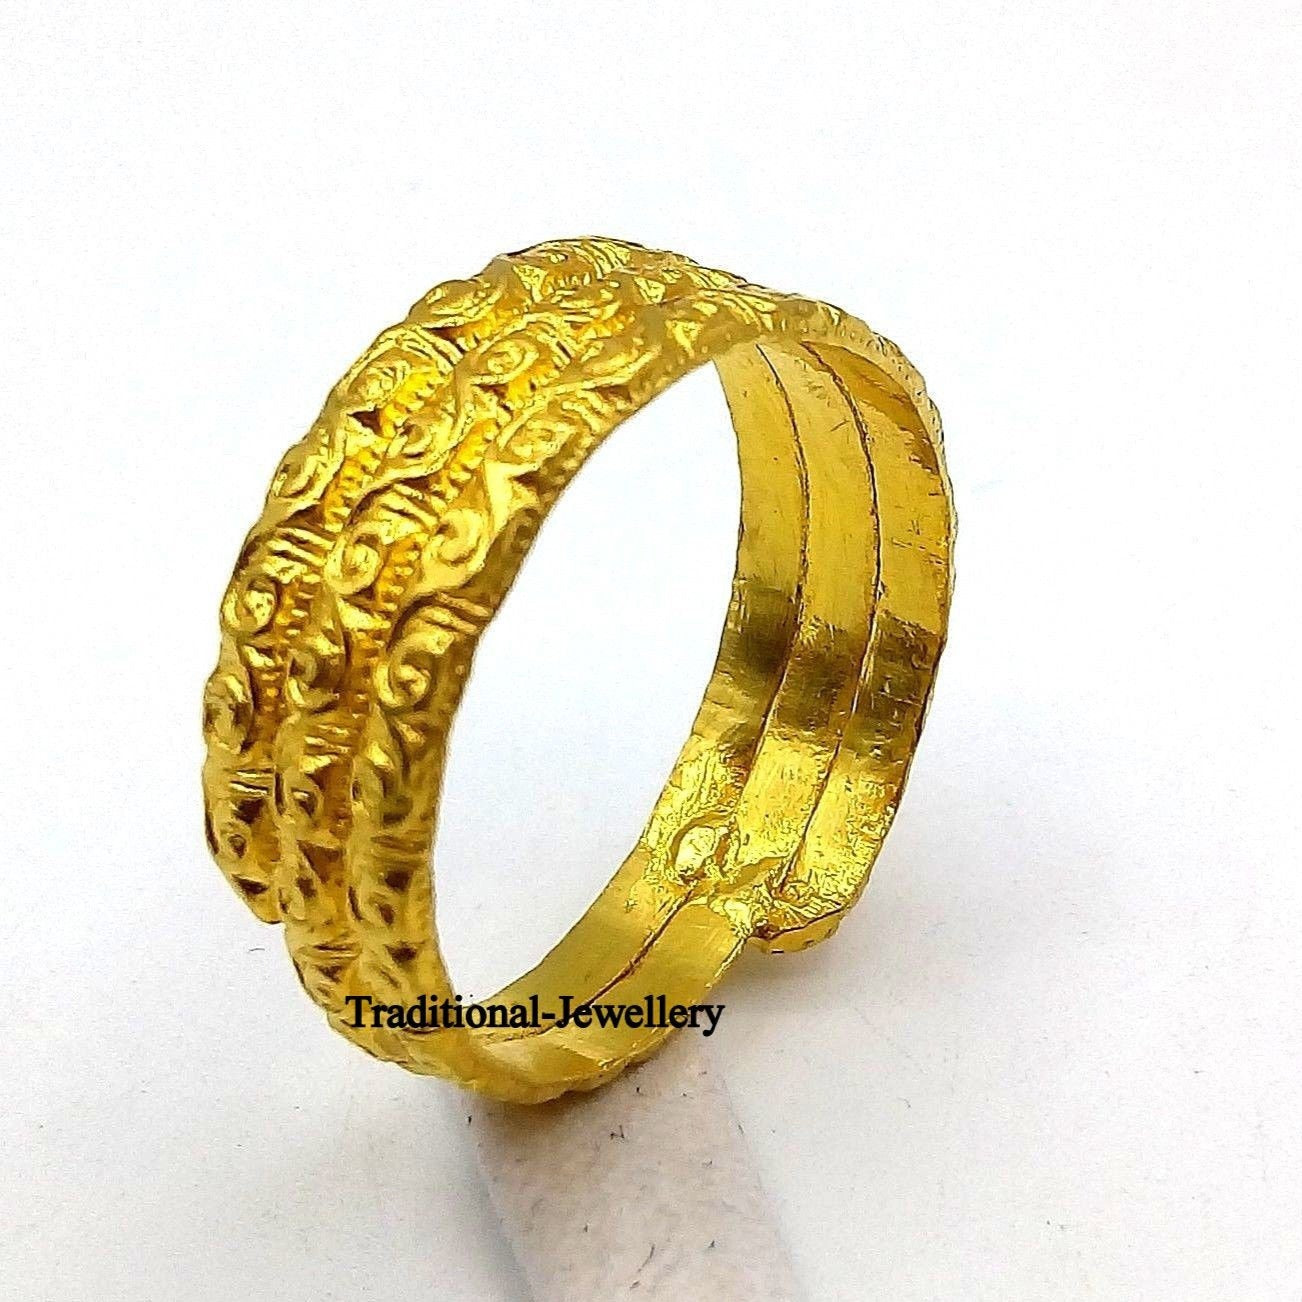 Vintage antique design 20 karat yellow gold handmade fabulous Toe ring pair  excellent wedding anniversary jewelry from india